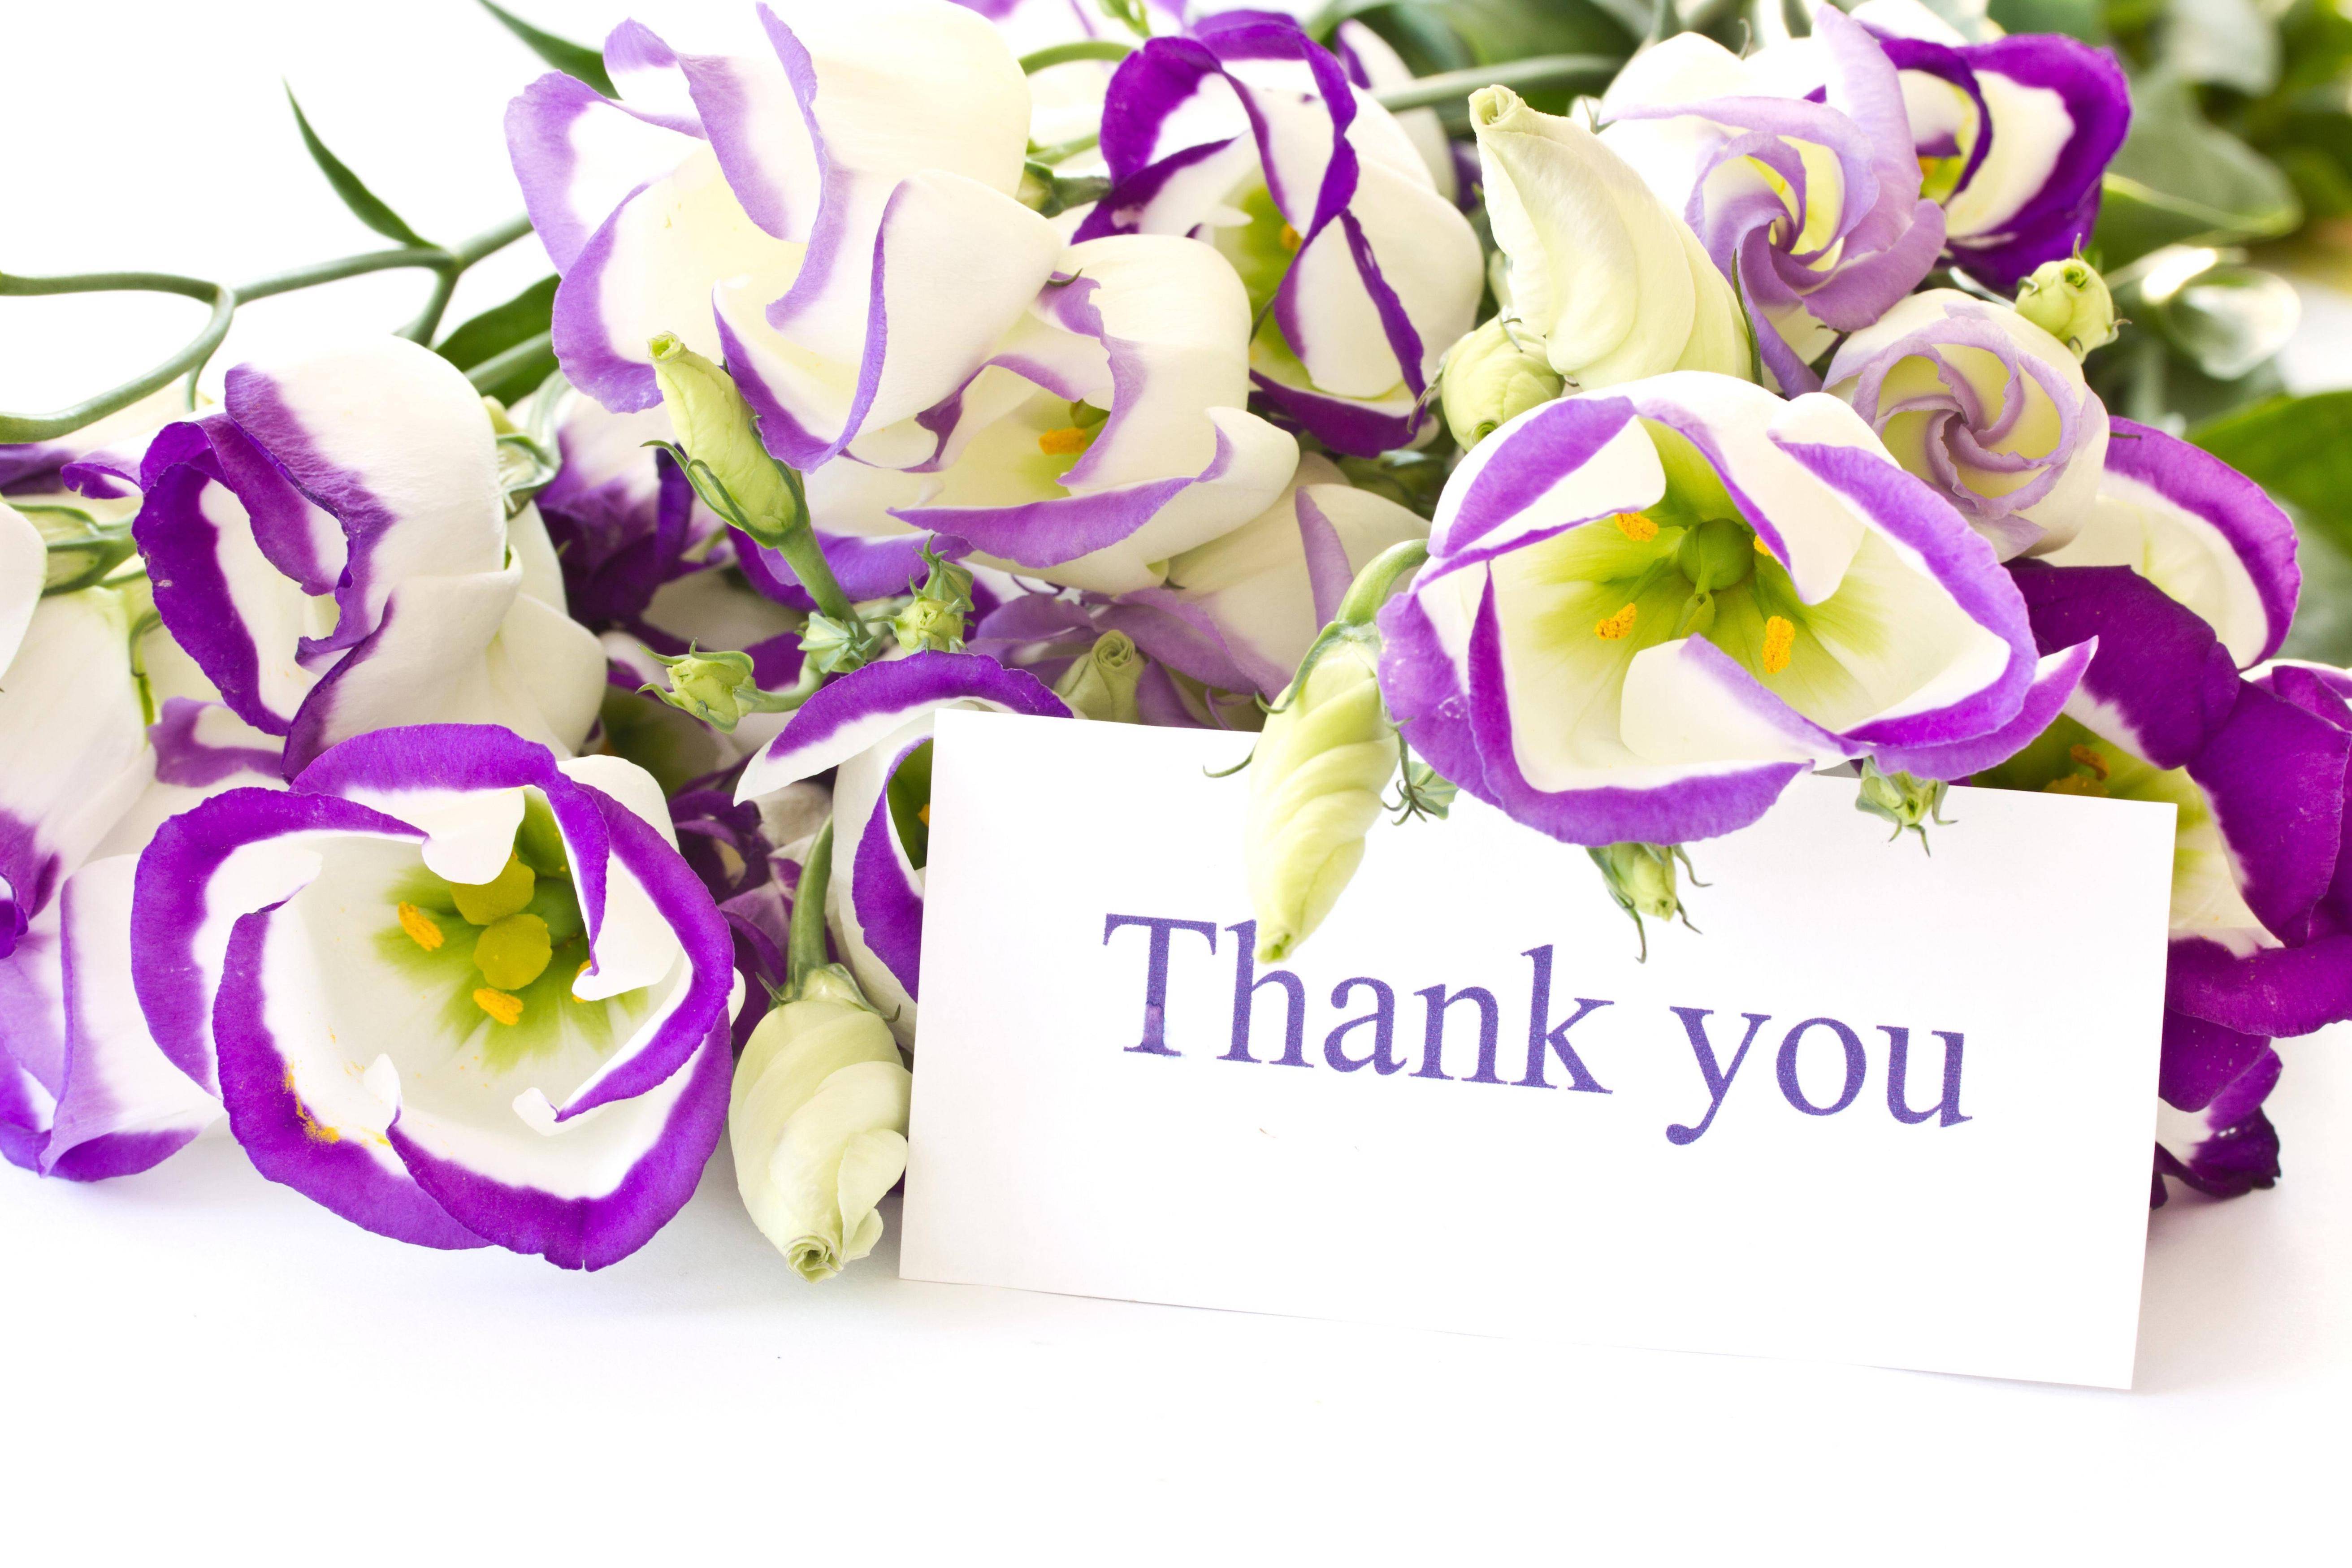 Thank You With flower HD Image Wallpaper free pics